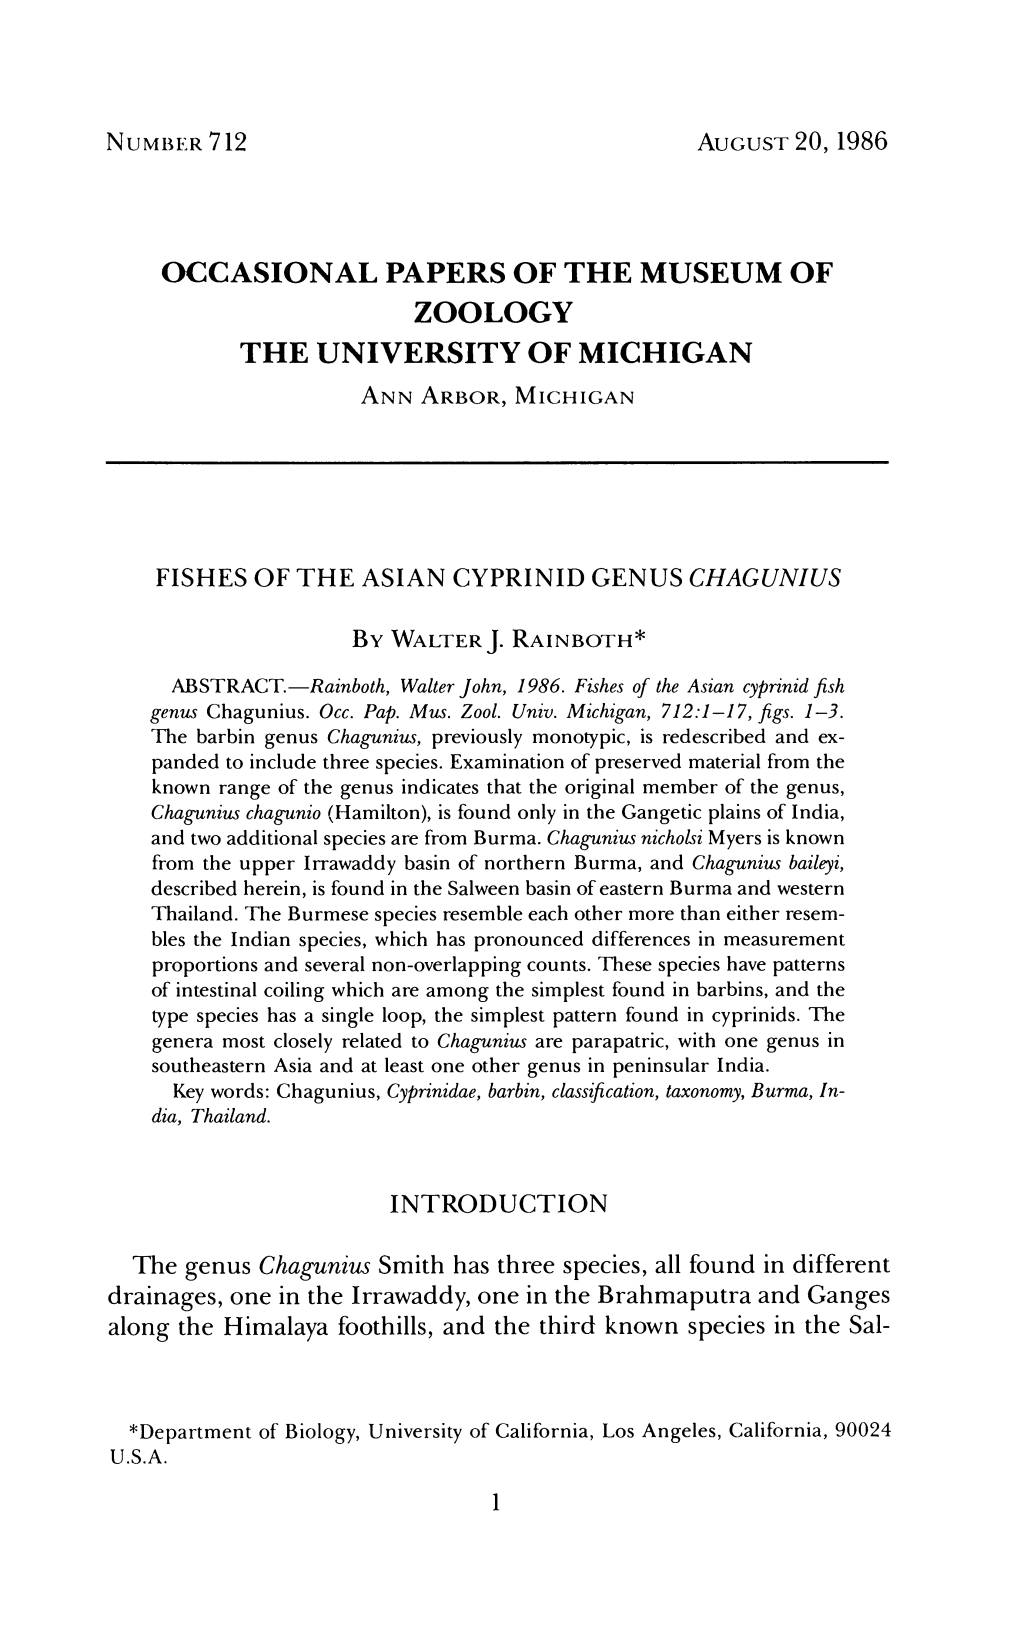 Occasional Papers of the Museum of Zoology the University of Michigan Annarbor, Miliiigan